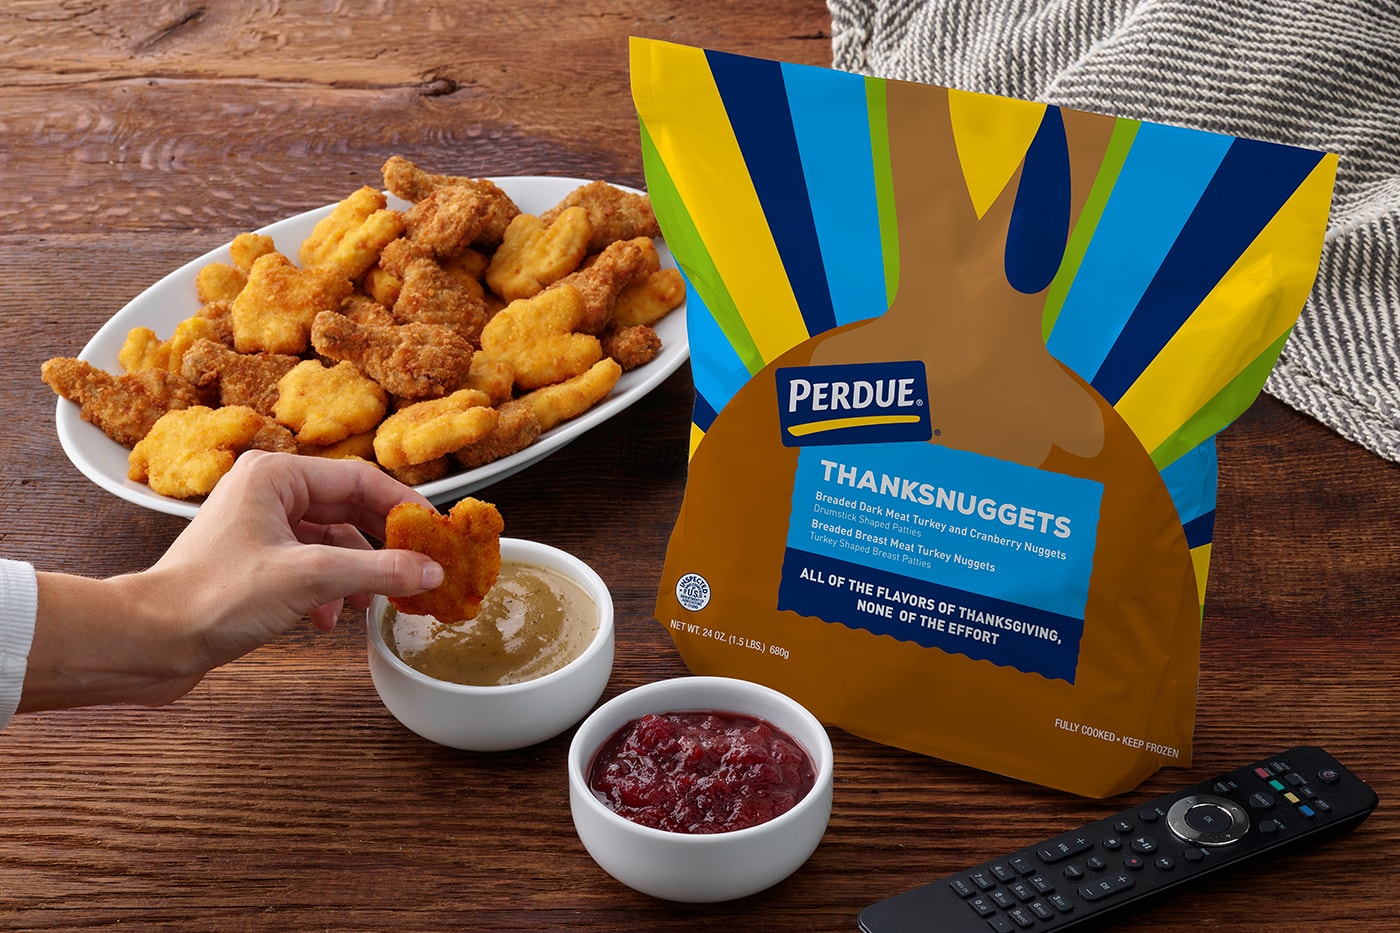 PERDUE ThanksNuggets Release Info Taste Review Buy Price Thanksgiving